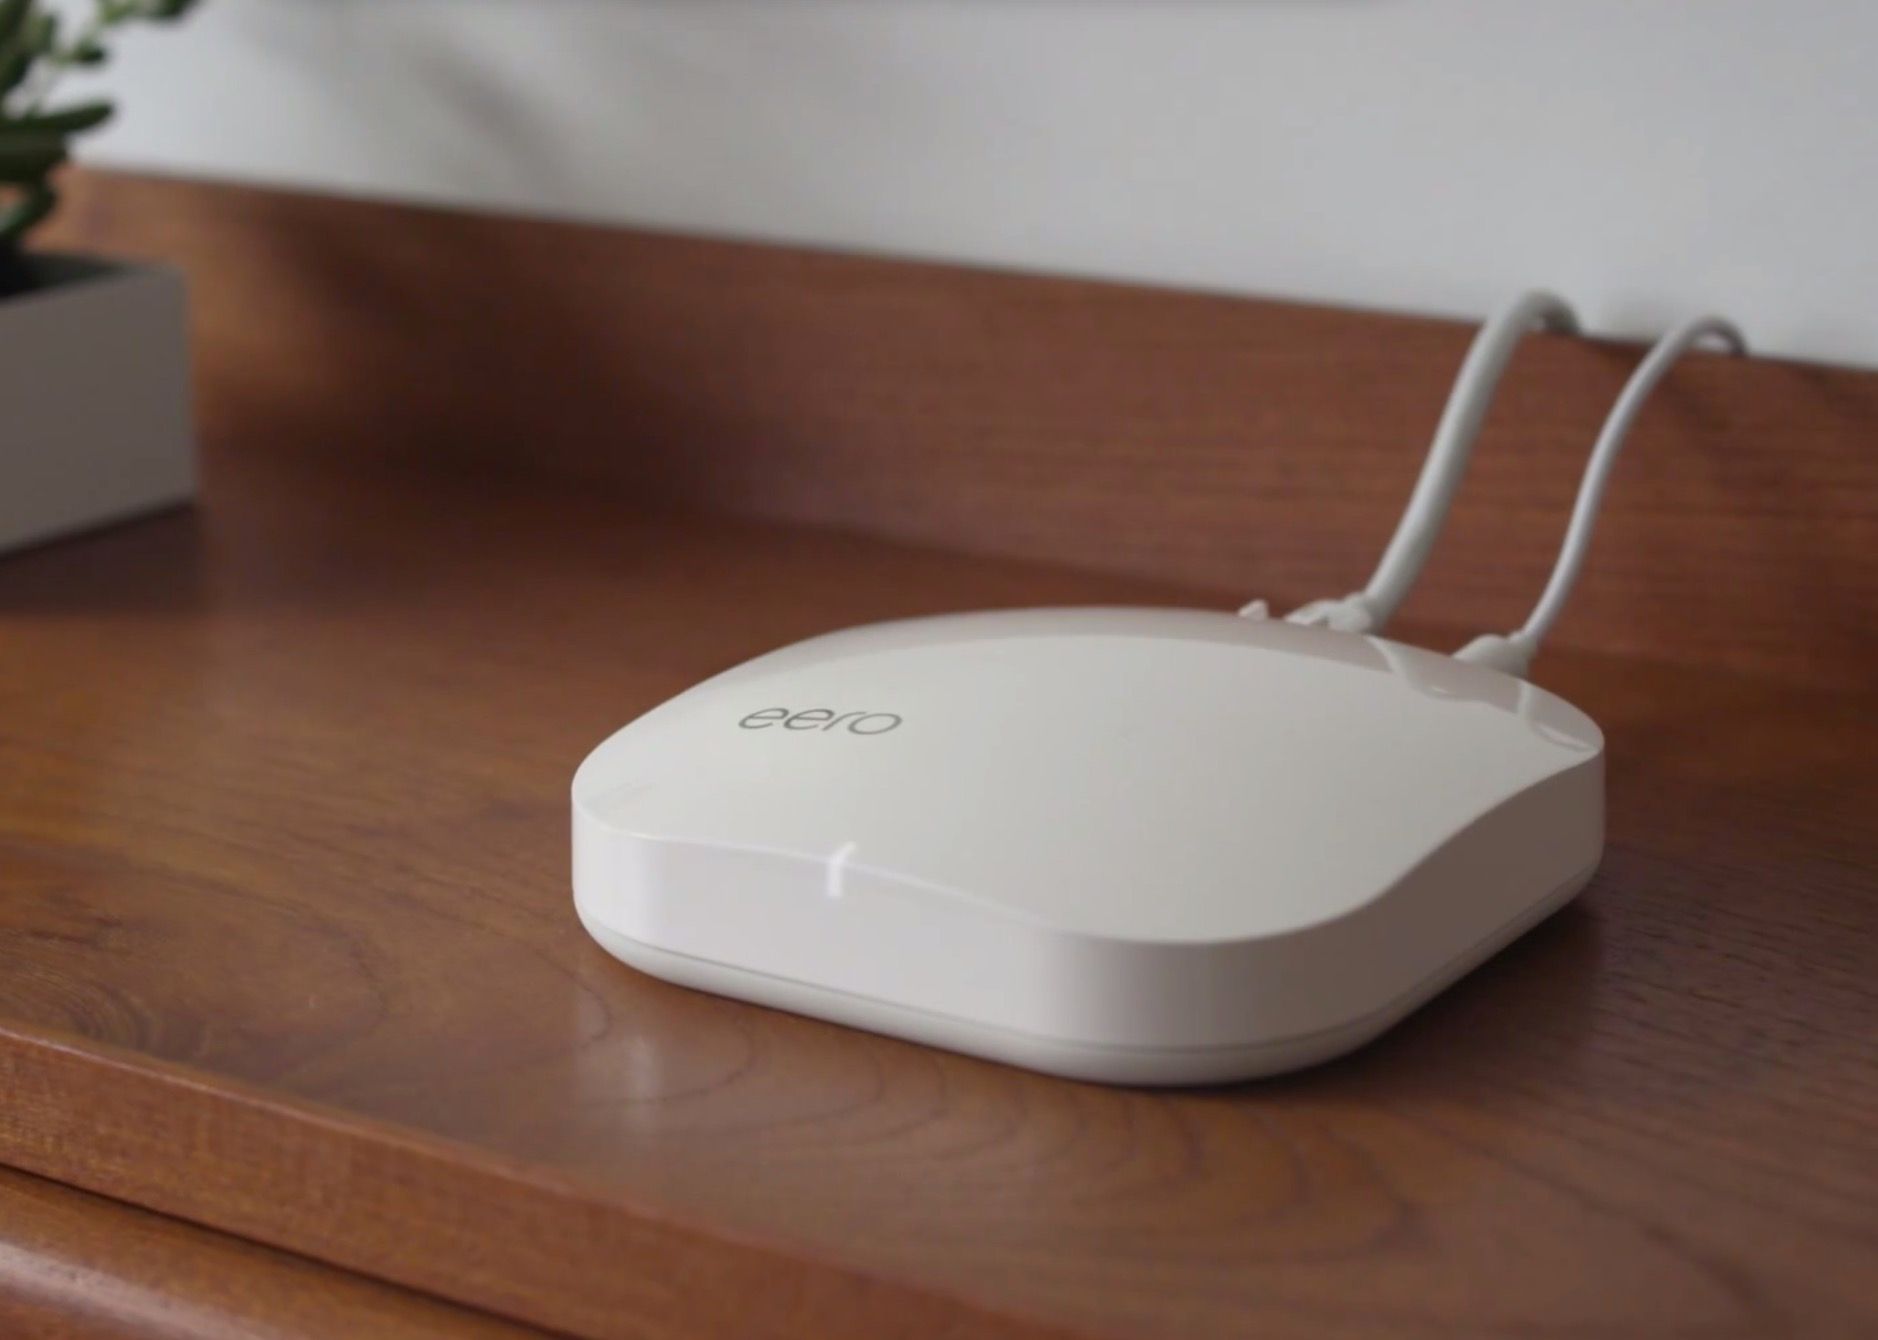 Eeros mesh Wi-Fi is now available in the UK image 1